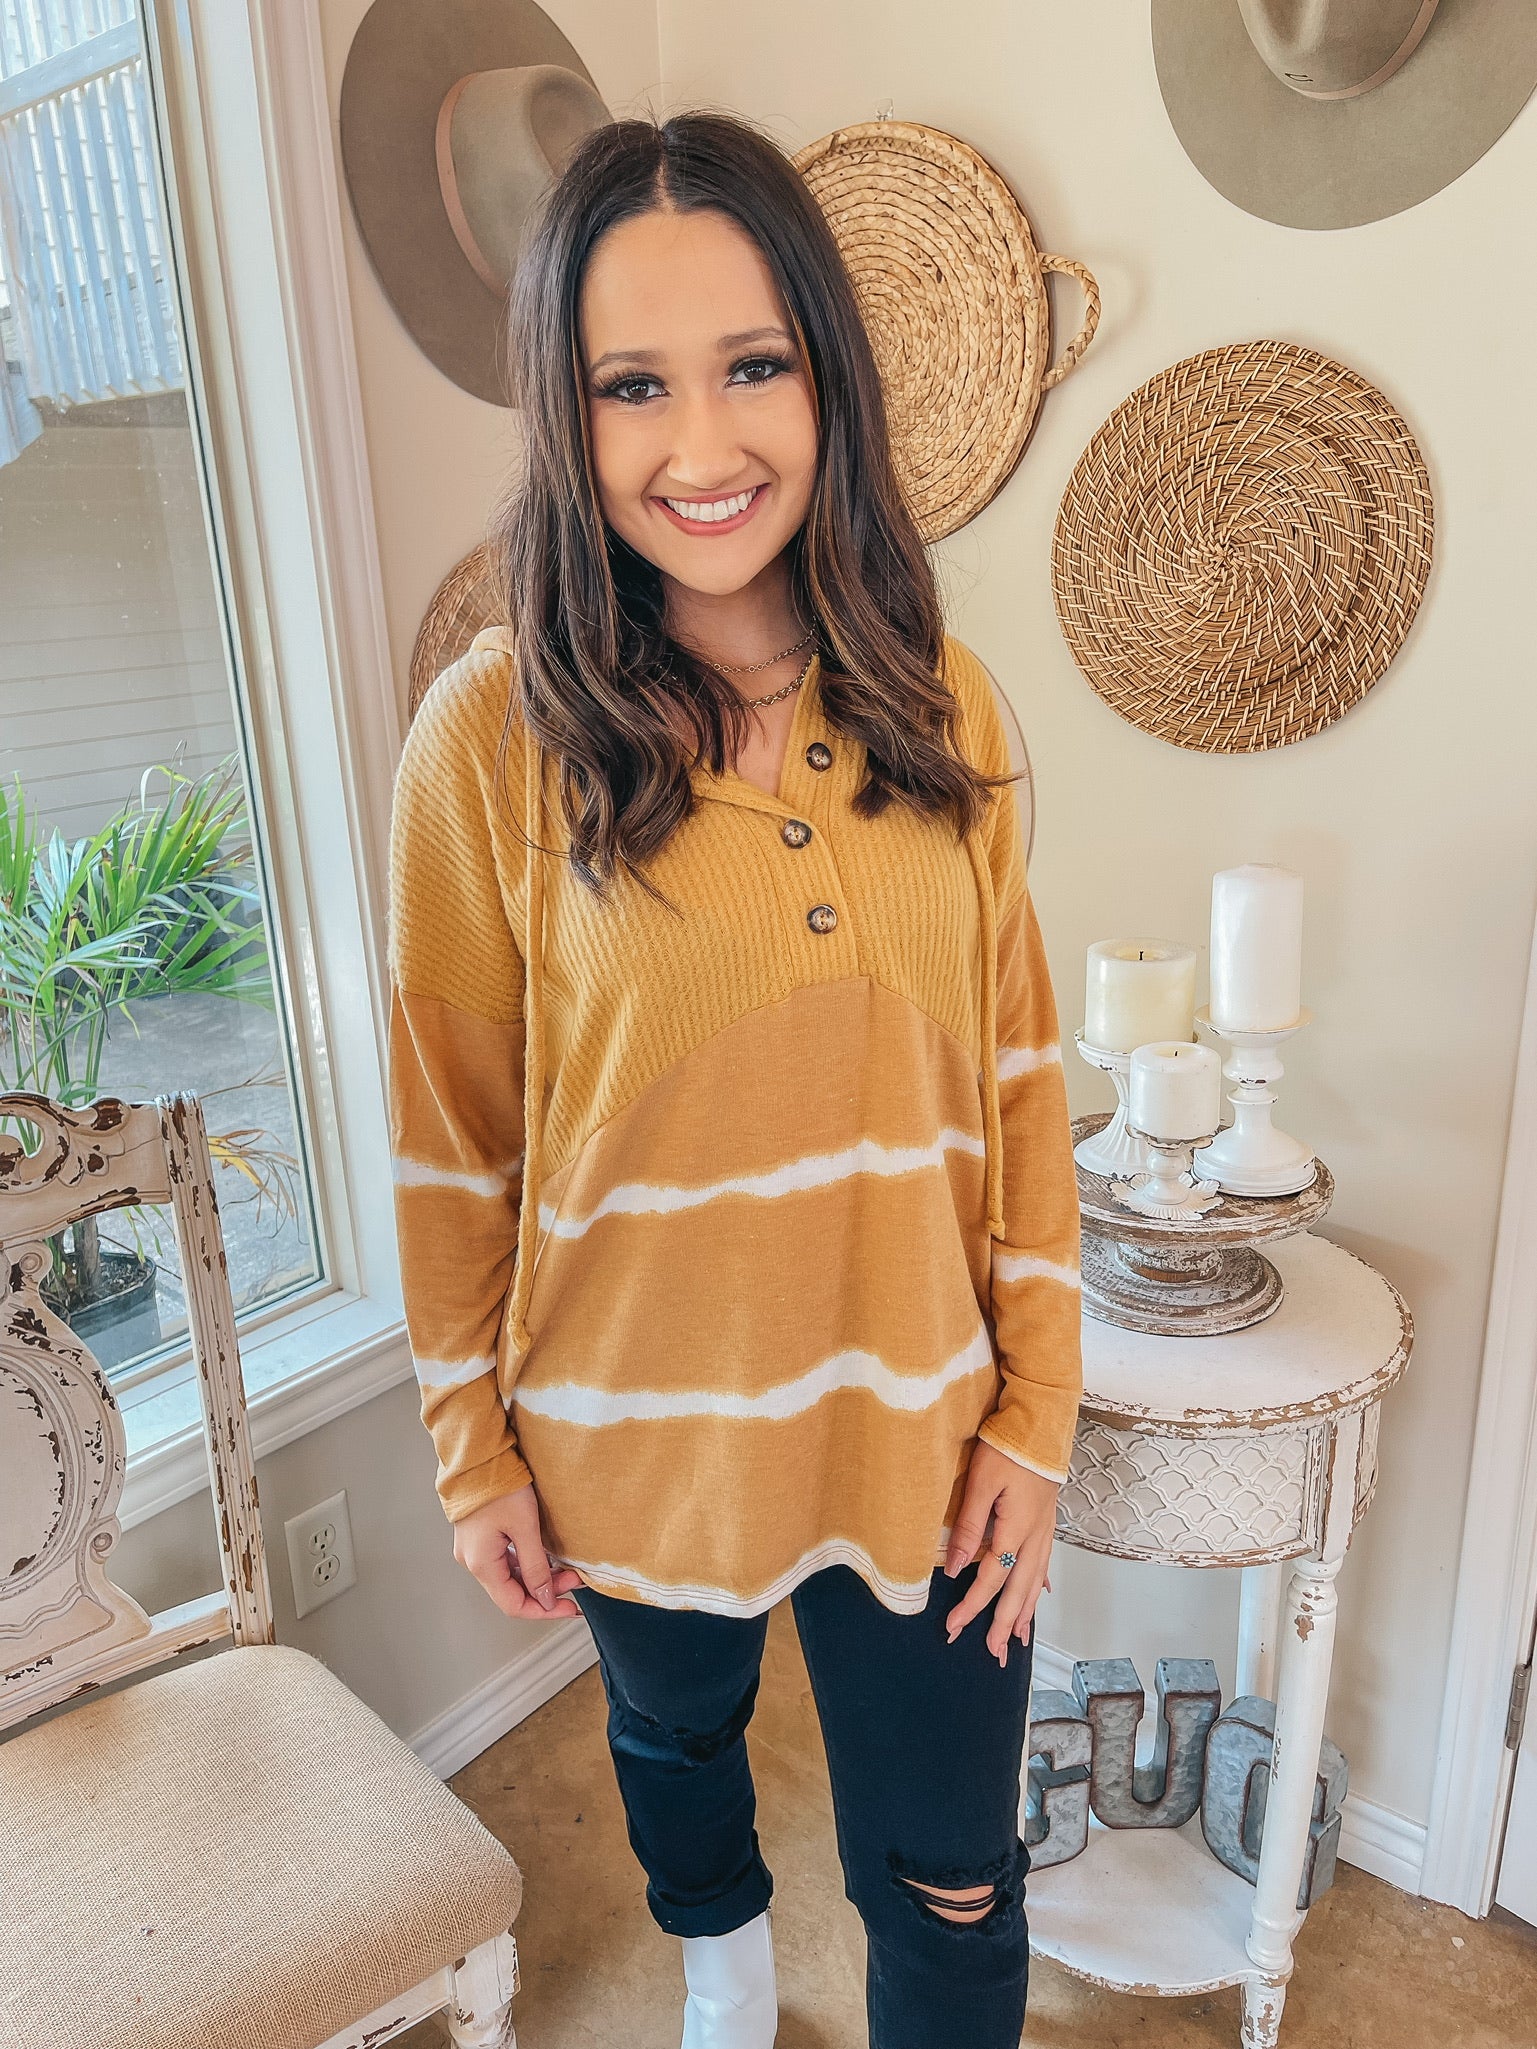 Next Chapter Striped Tie Dye Waffle Knit Hoodie Top in Mustard - Giddy Up Glamour Boutique